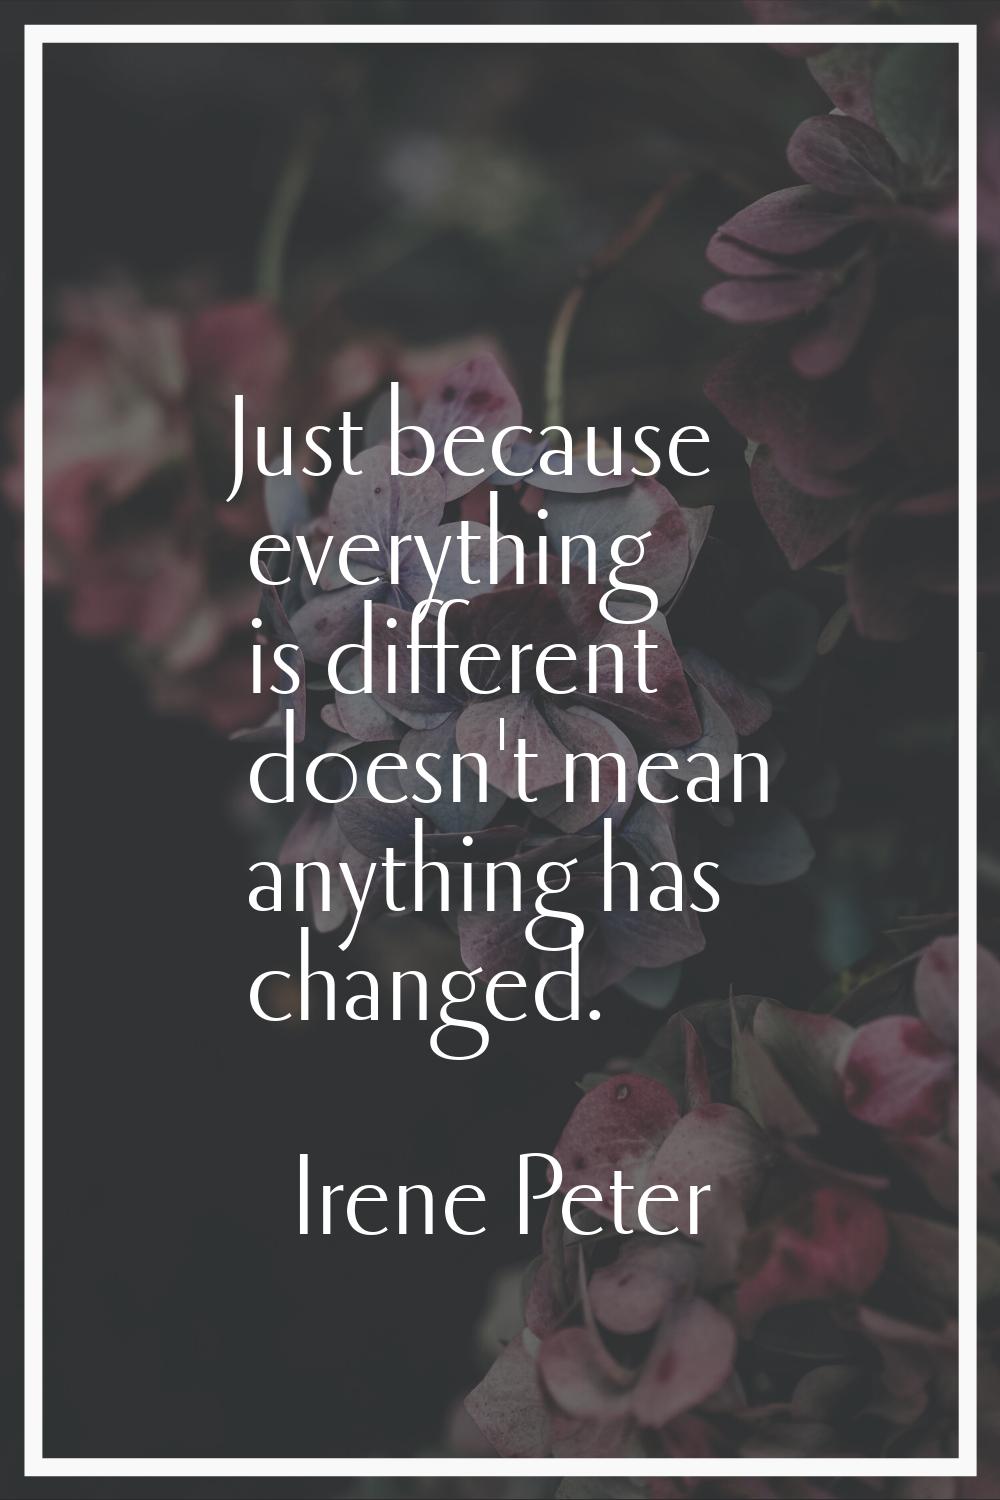 Just because everything is different doesn't mean anything has changed.